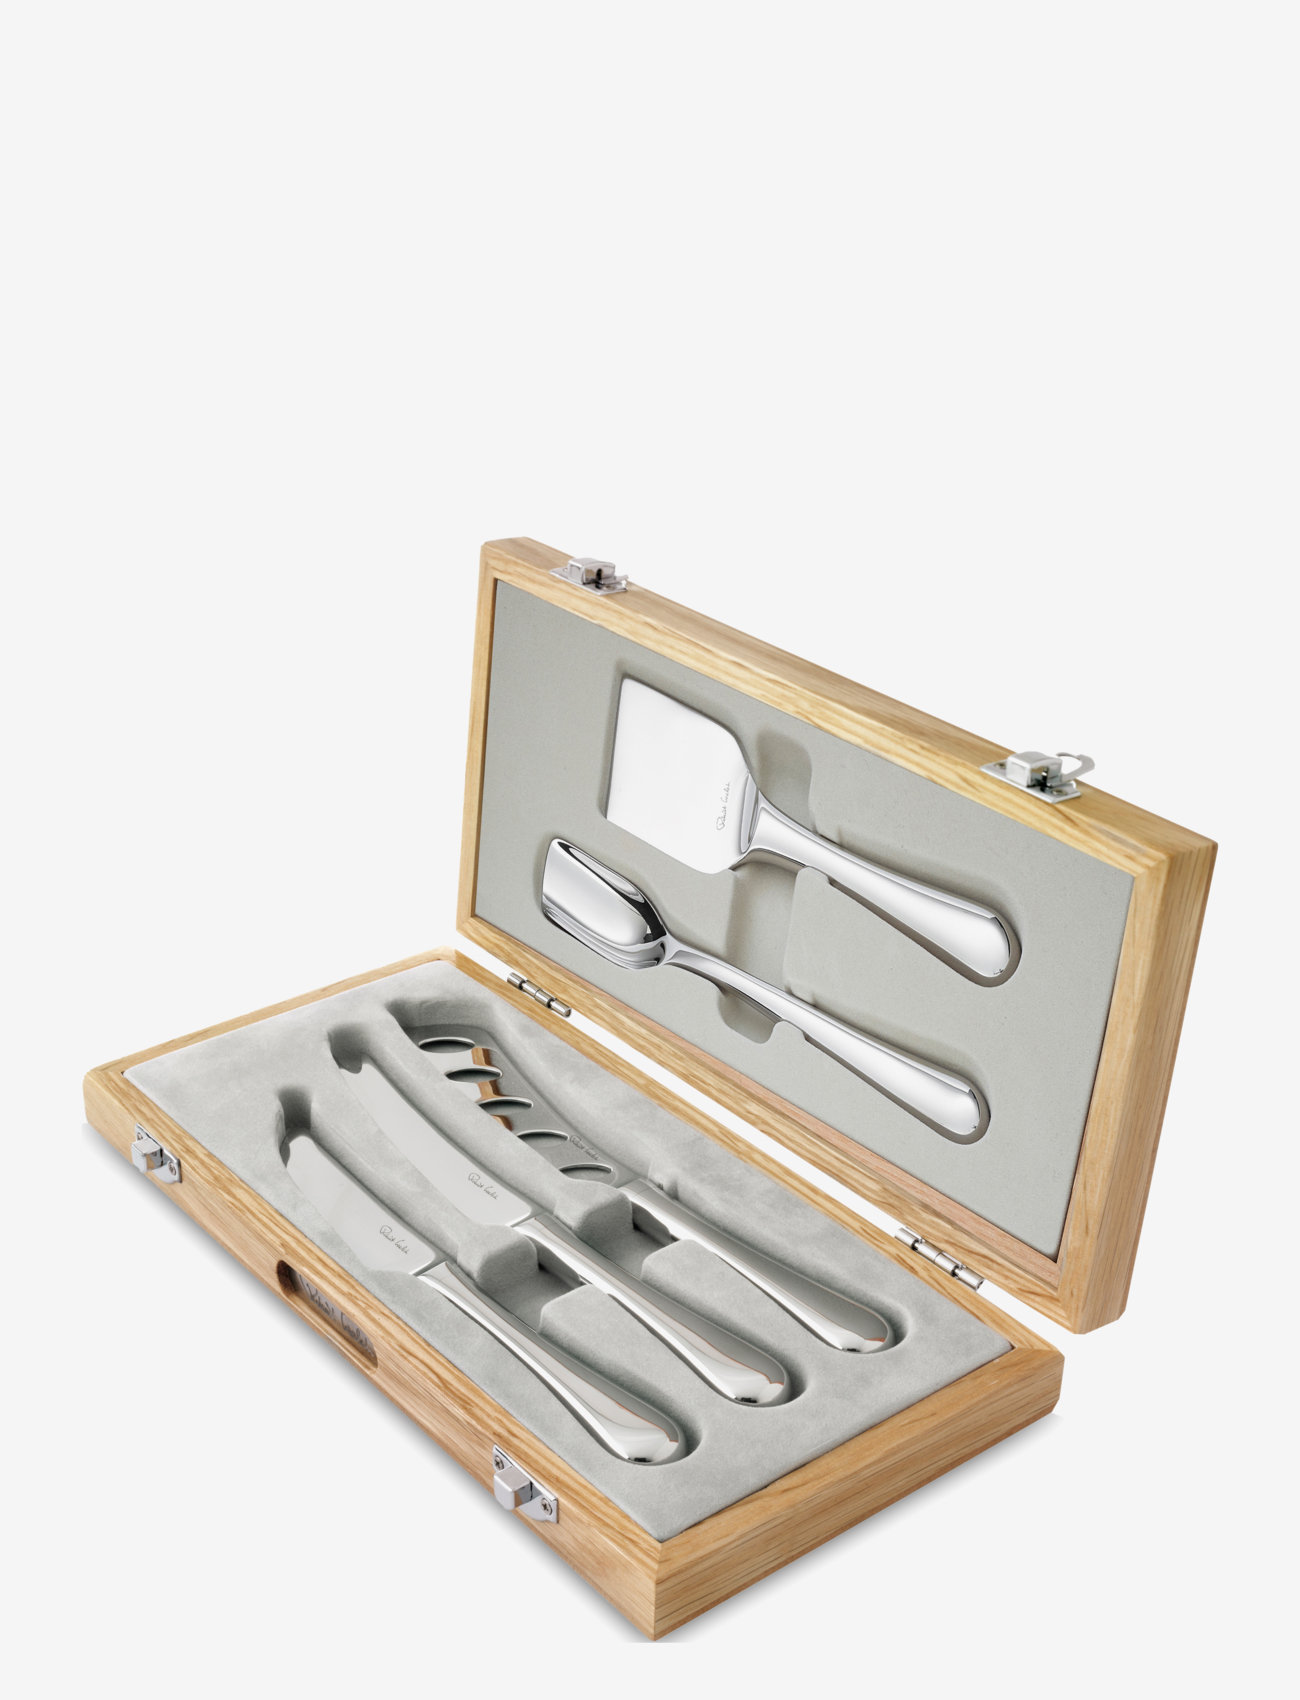 Robert Welch - Radford Bright Gourmet Cheese Knife Set, 5 Piece - ostekniver - multi colour - 1